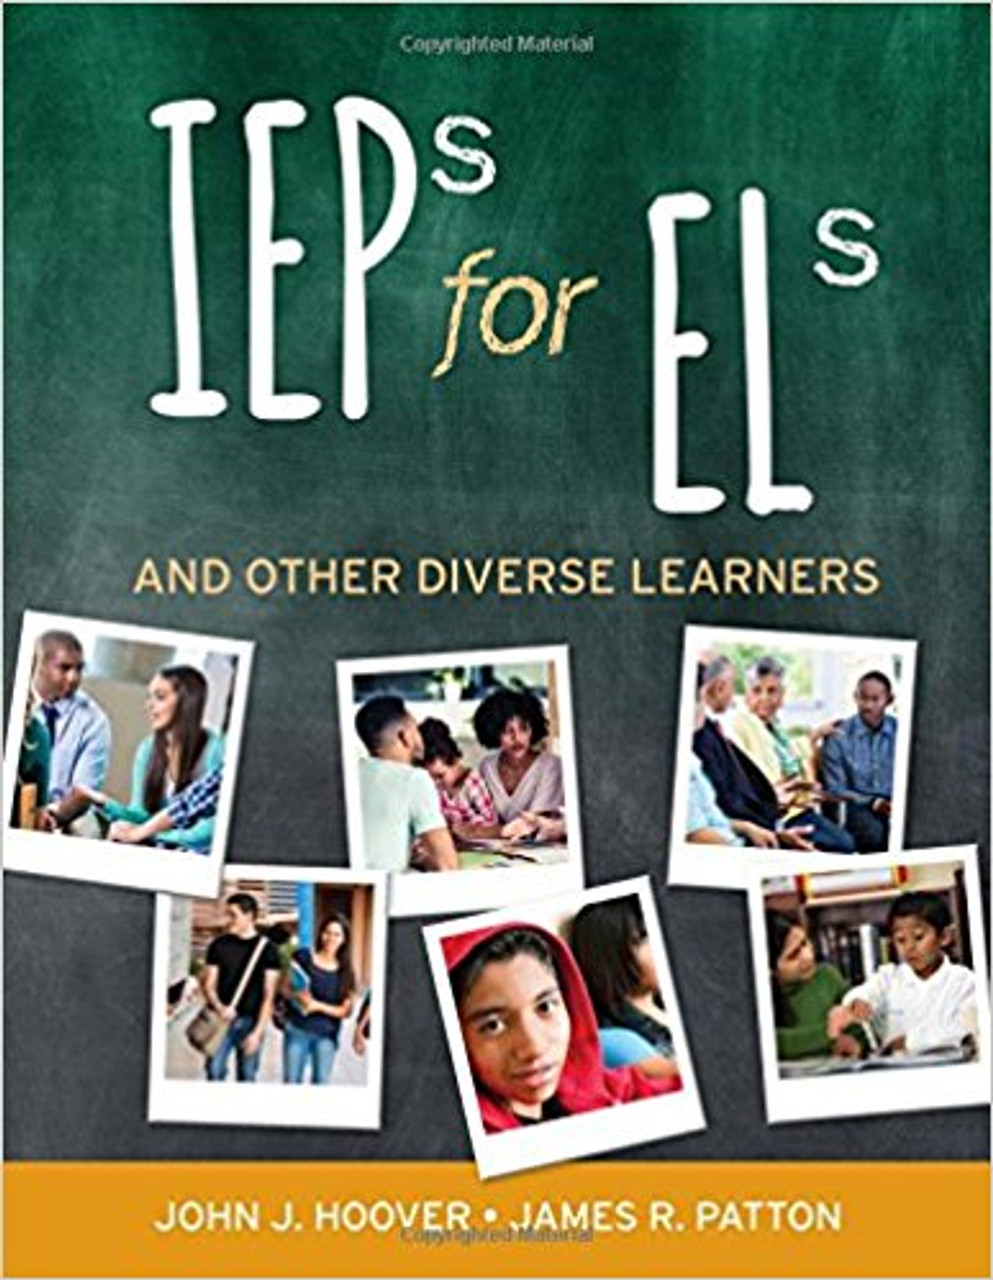 High-quality IEPs are fundamental for guiding the educational process of and developing goals for students who require special education services. English learners (ELs) and other students with learning, emotional, or behavioral disabilities present unique challenges to educators responsible for referring, assessing, and placing them. This book guides educators through the process for creating high-quality IEPs for these K-12 learners.